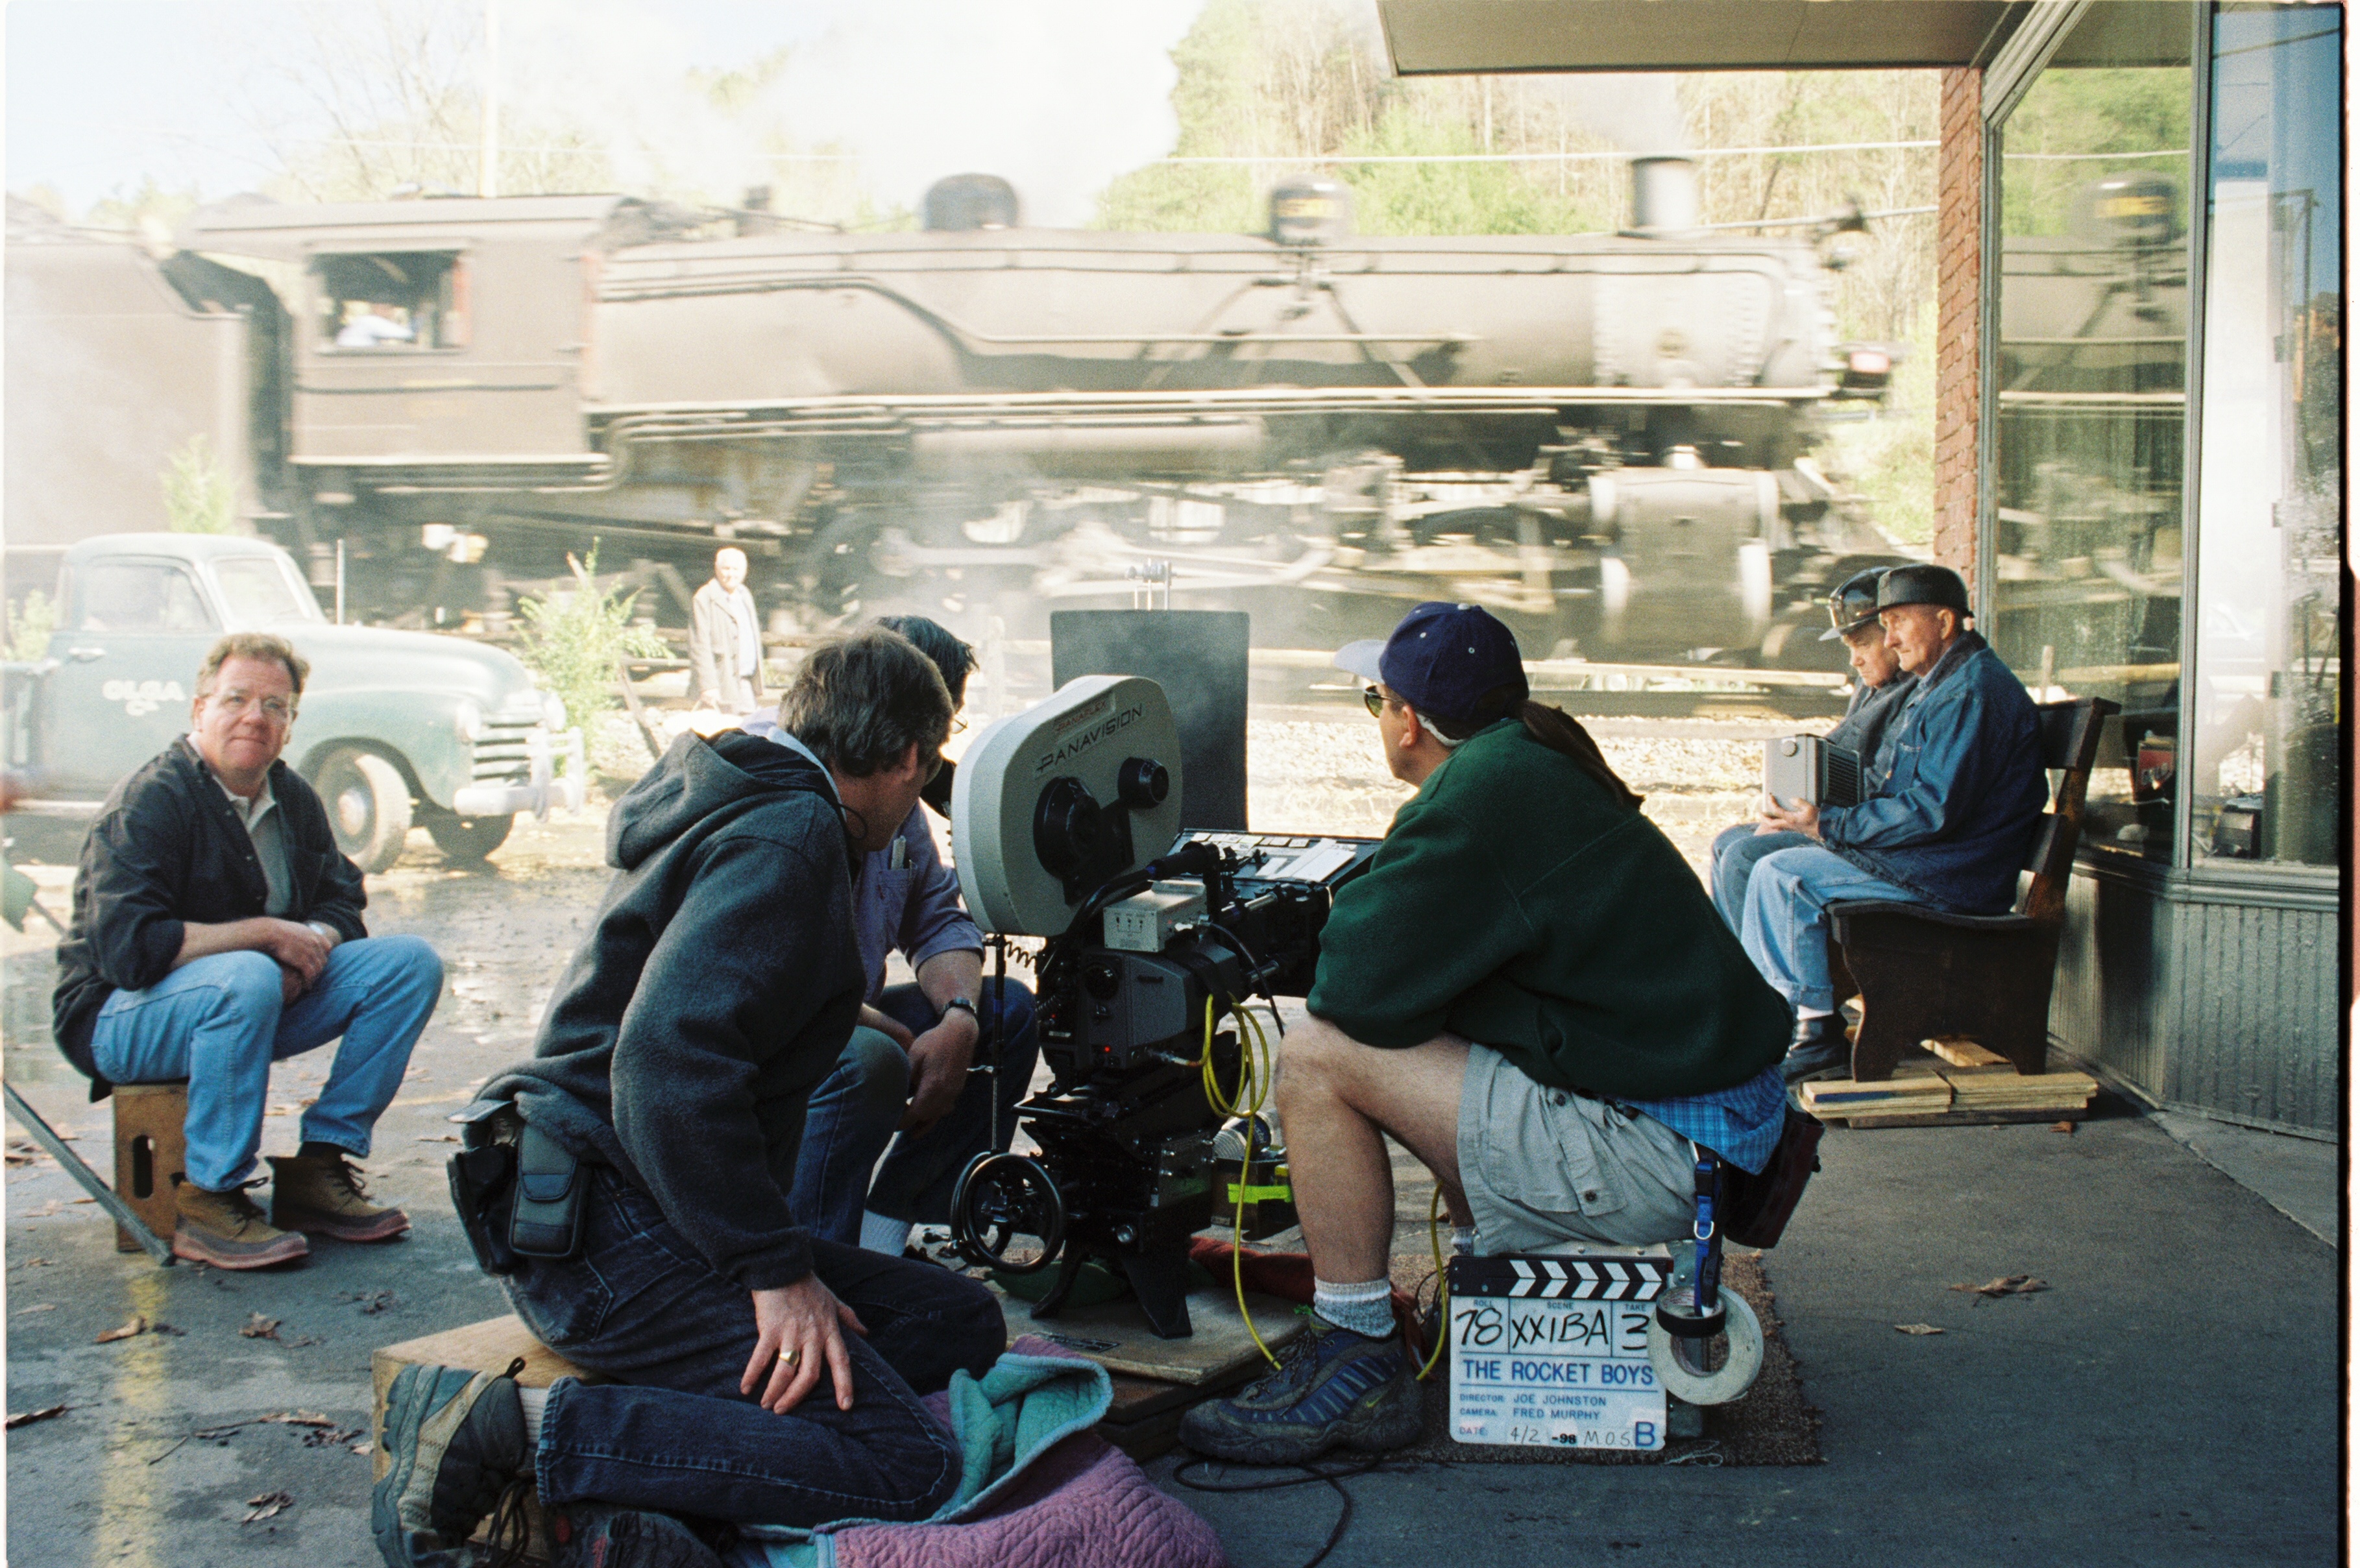 On location. October Sky, April 1998. #4501 rolls through Oliver Springs on one of the day's 11 photo run-bys. NS Tennessee Division supervisors and TVRM crews created on-time and flawless film work.